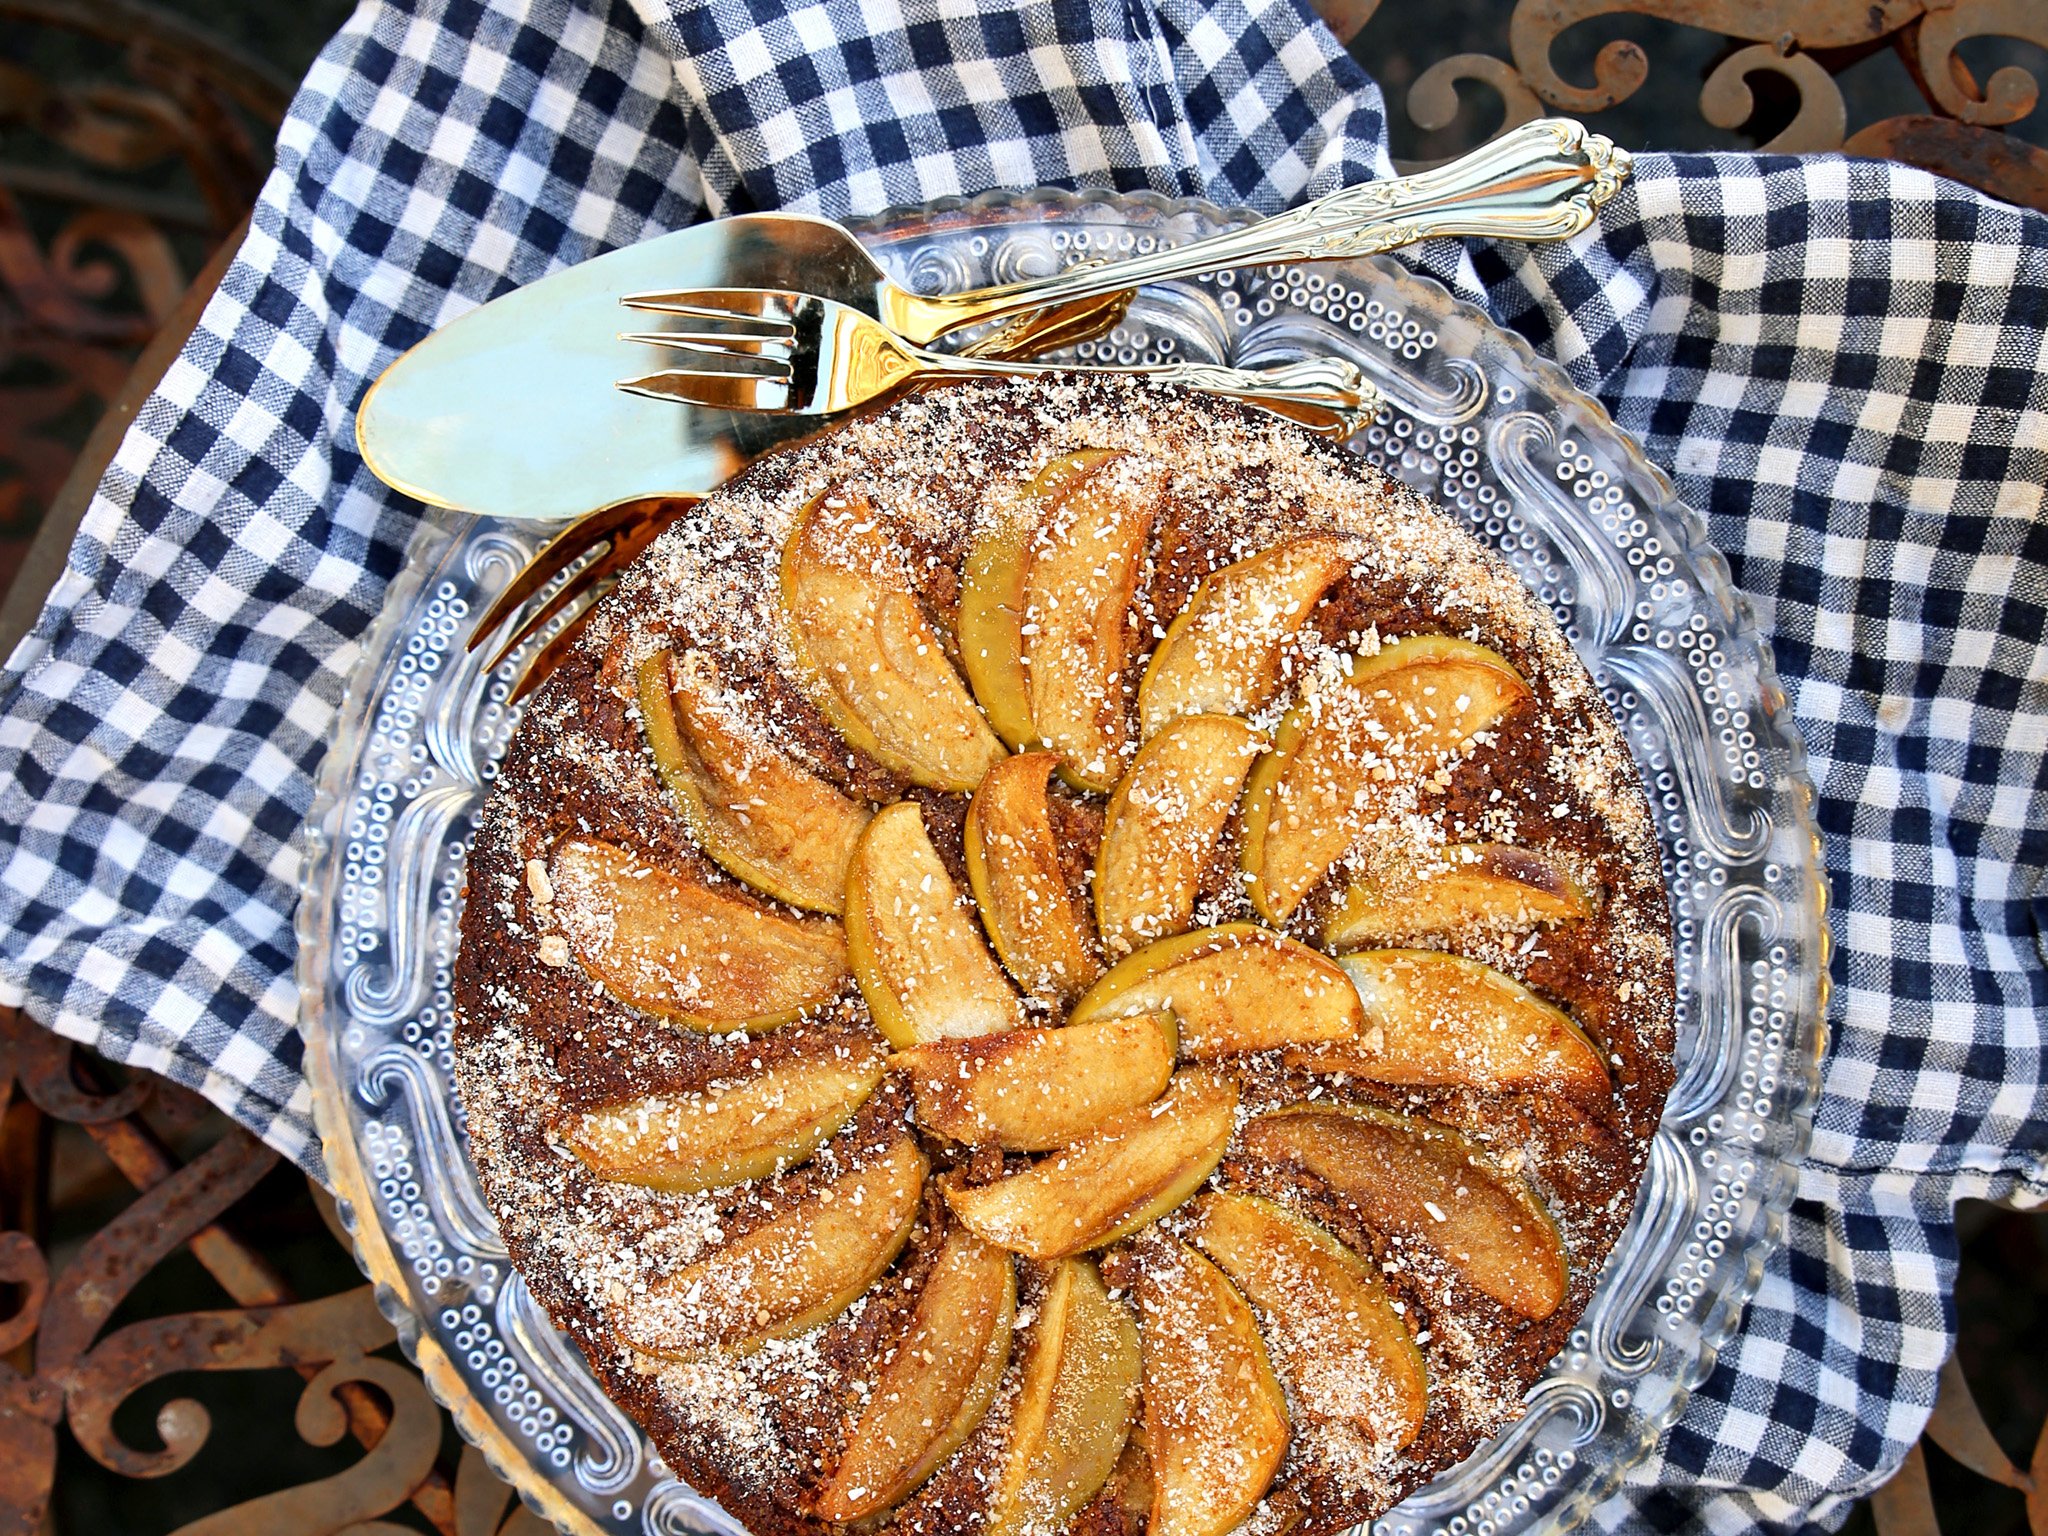 Sicilian almond, apple and ricotta cake with pecans